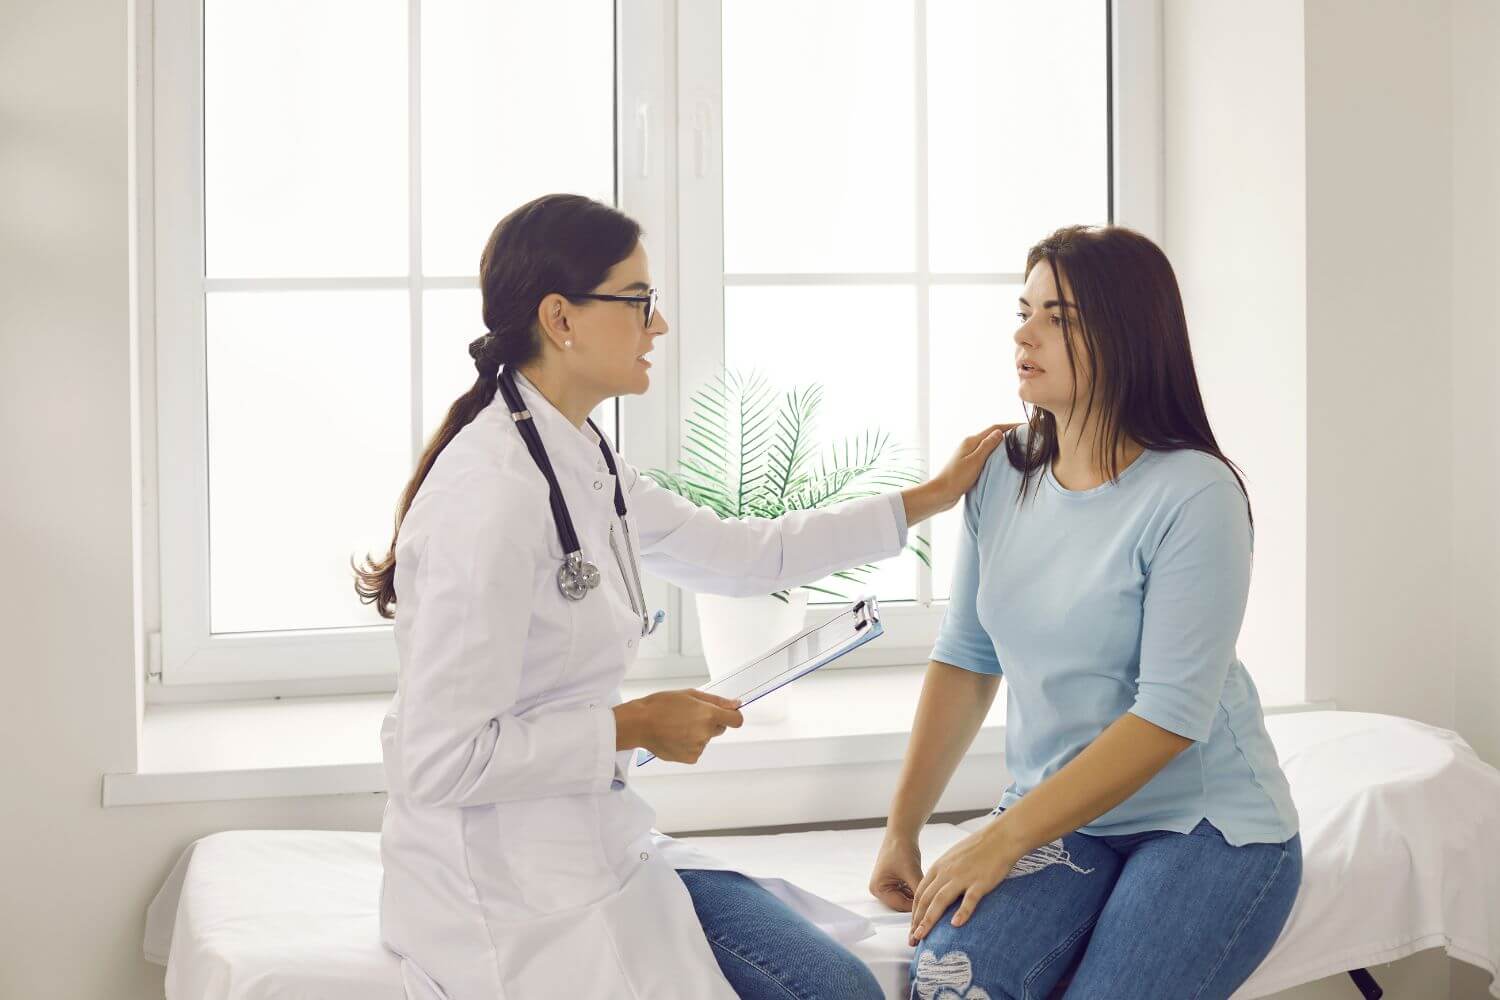 Woman speaking with a physician at a medical office